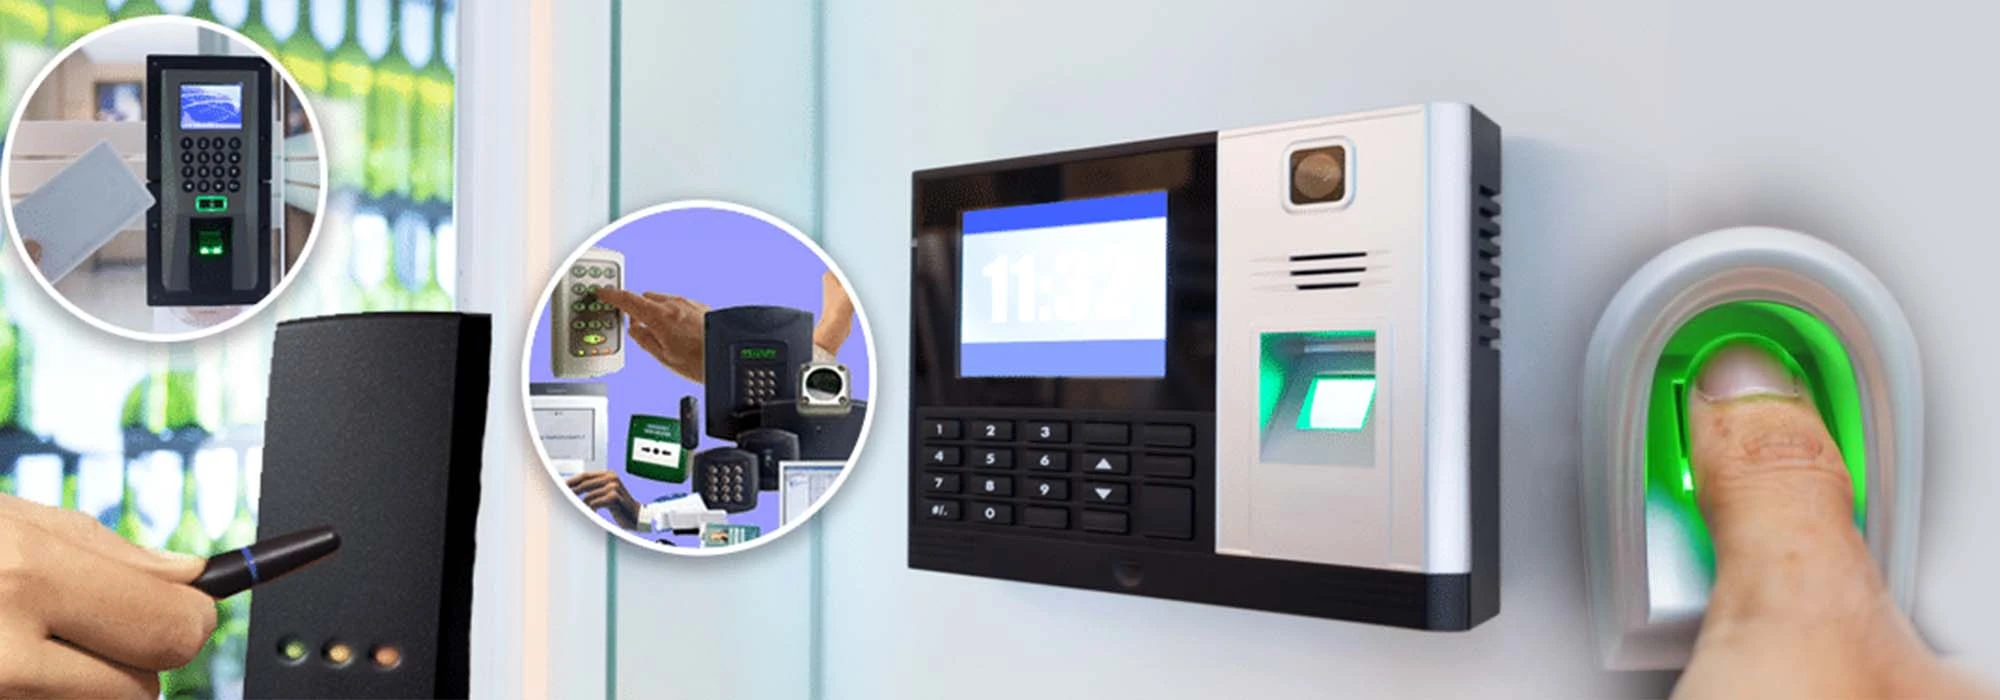 access-control-system-services Access Control Near Me